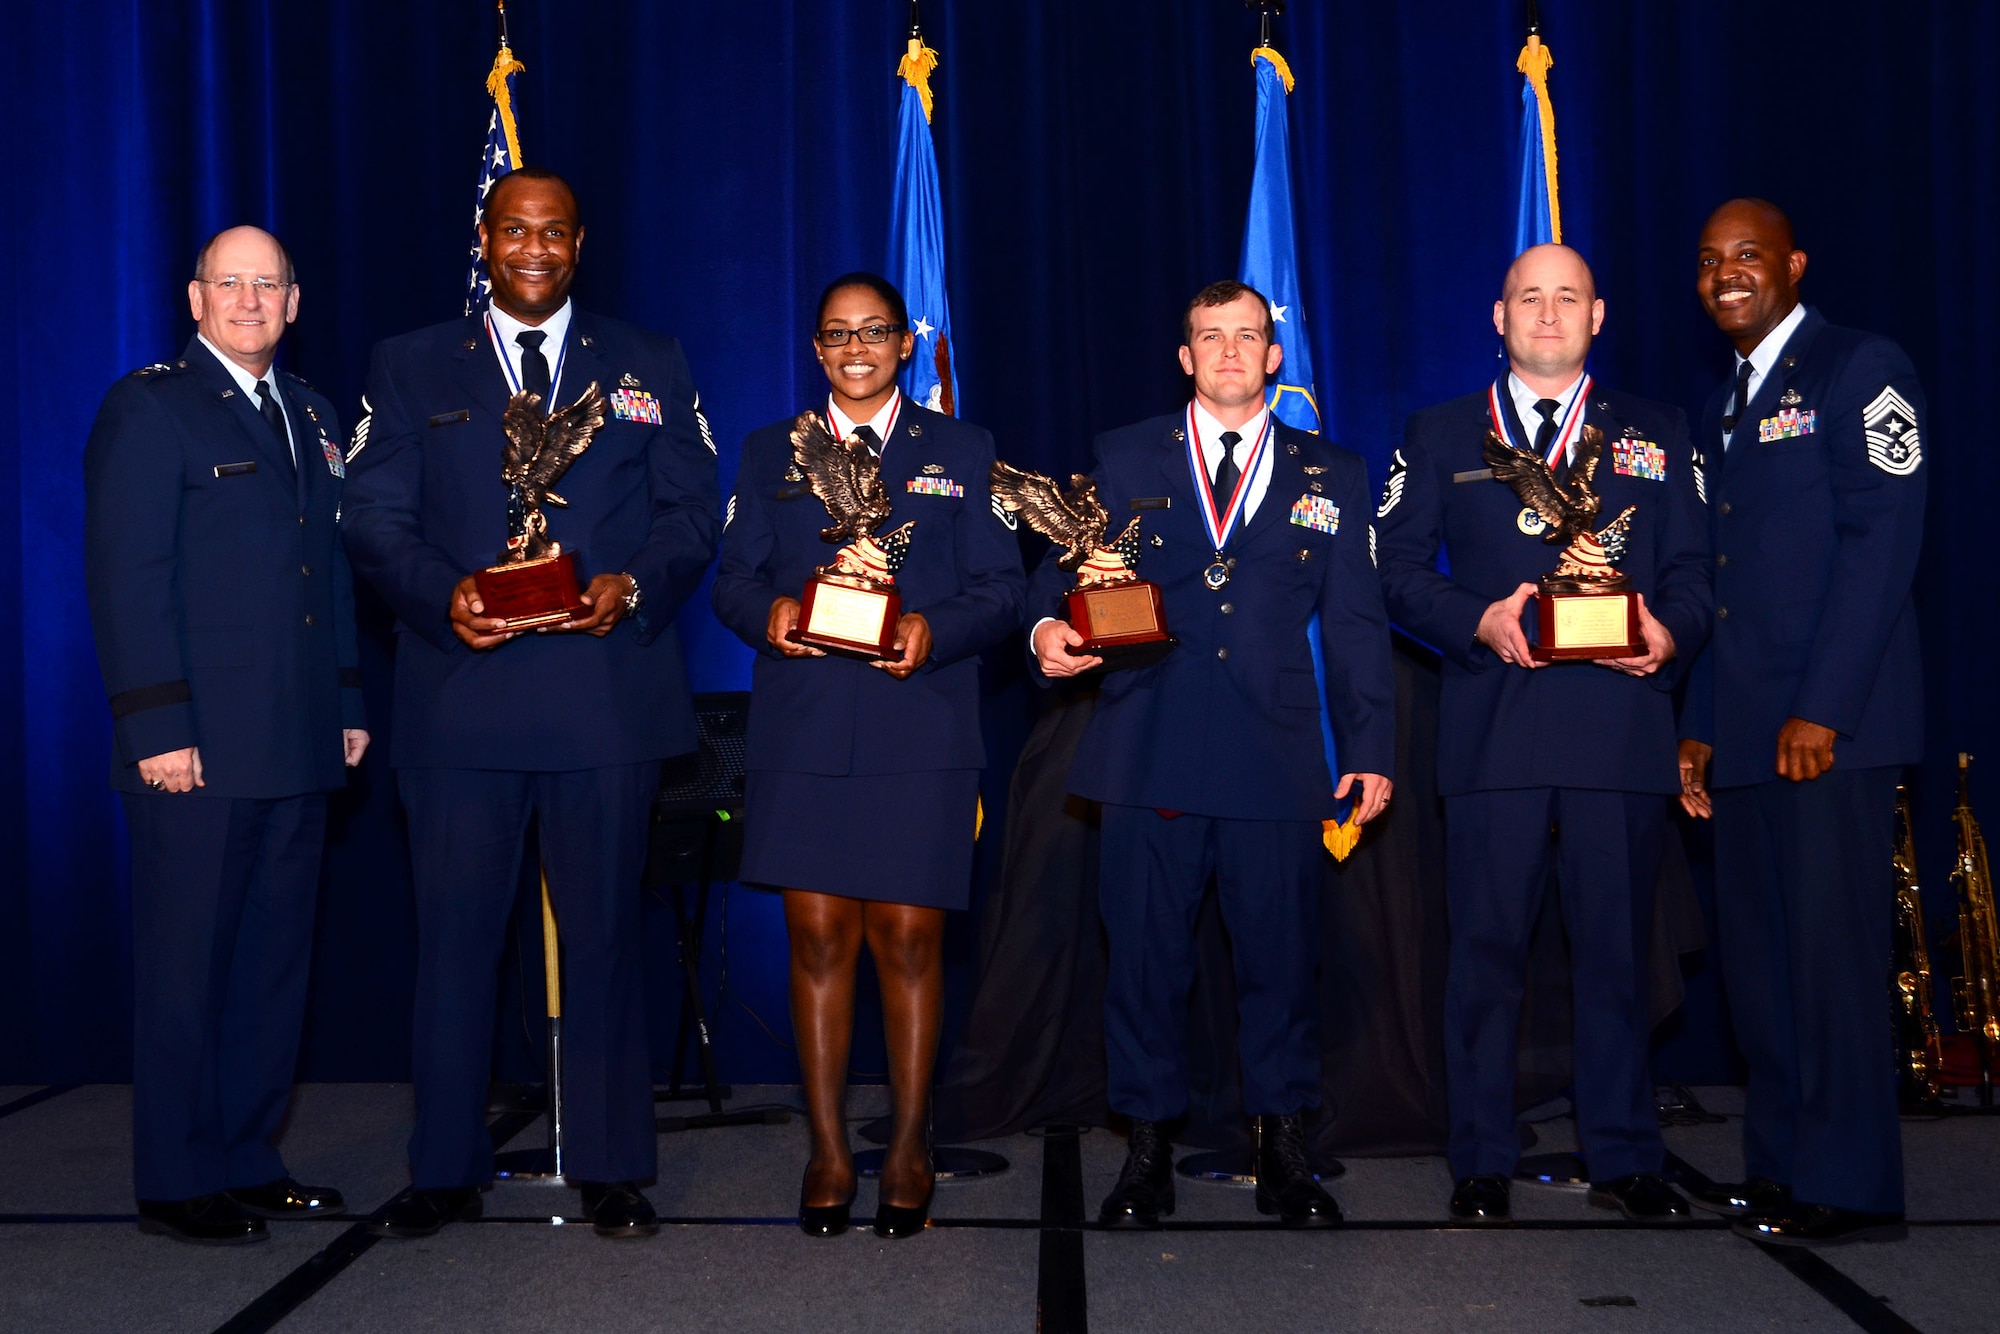 Air Force Reserve Command’s Outstanding Airman of the Year winners pose for a photo with Lt. Gen. James Jackson, AFRC commander, and Chief Master Sgt. Cameron Kirksey, AFRC command chief, during the AFRC OAY banquet at the Waverly Hotel in Atlanta, Ga., April 15, 2015. The AFRC banquet honored Citizen Airmen for the hard work and dedication. (Third from the right) Noncommissioned Officer of the Year: Tech. Sgt. Clayton Crouse is a part of the 306th Rescue Squadron, Davis-Monthan AFB, Arizona, which is part of the 920th Rescue Wing headquartered at Patrick Air Force Base, Fla. (U.S. Air Force photo/Brad Fallin)